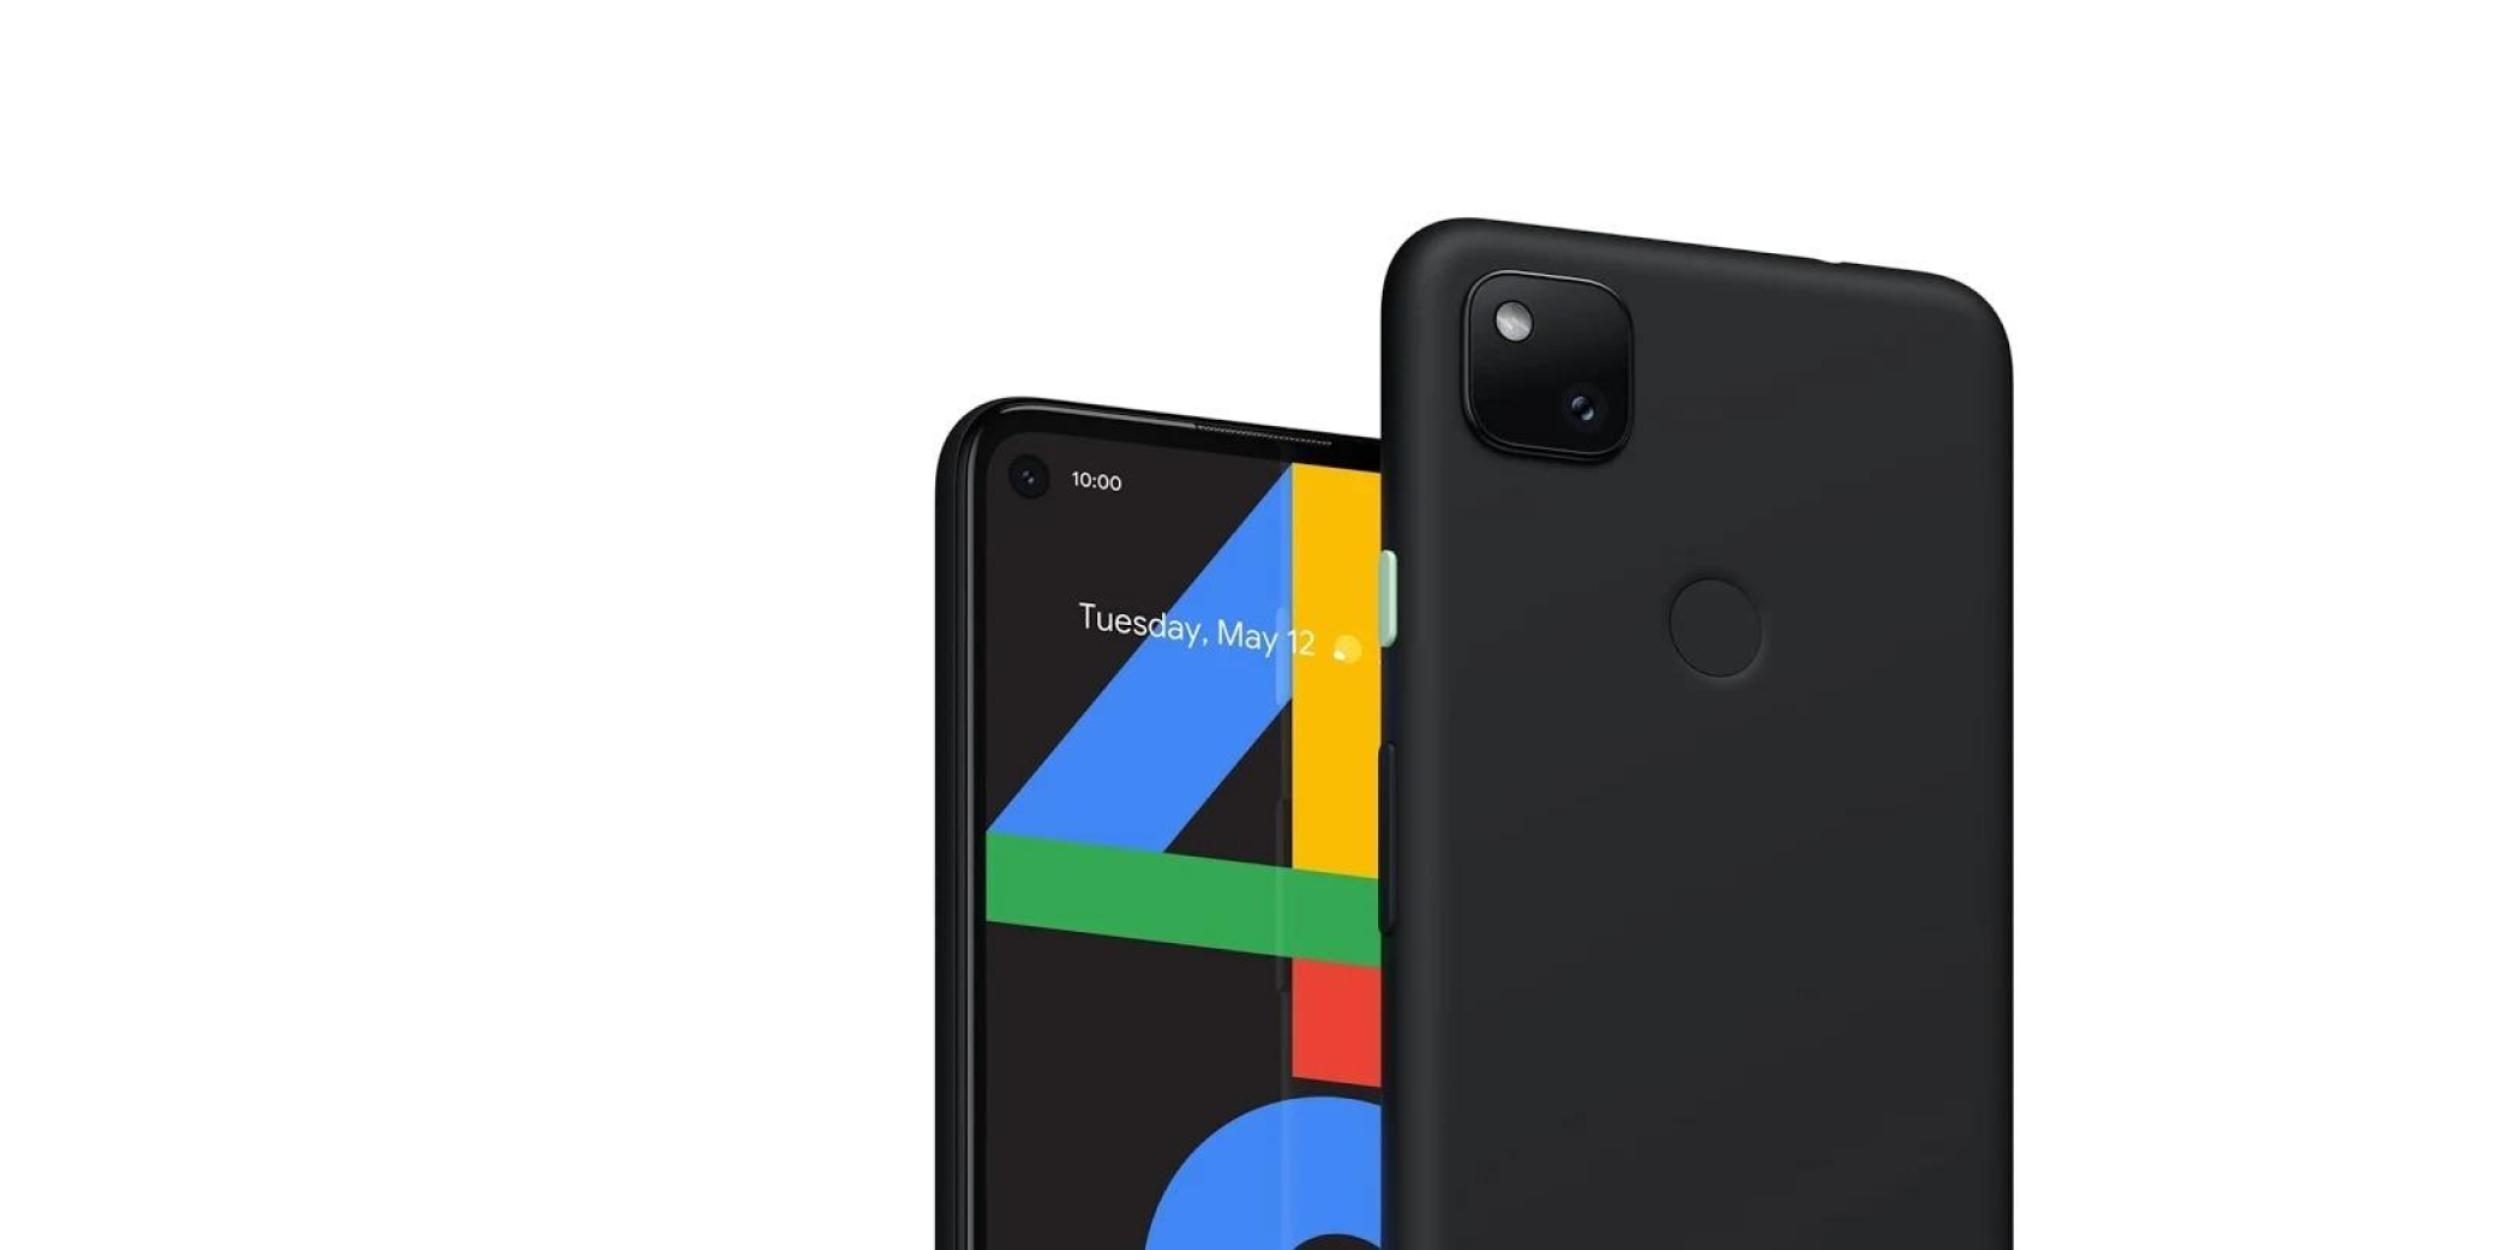 Leaked Google Pixel 4a press render - Google Pixel 4a detailed in full before launch: specs, cameras, price, availability